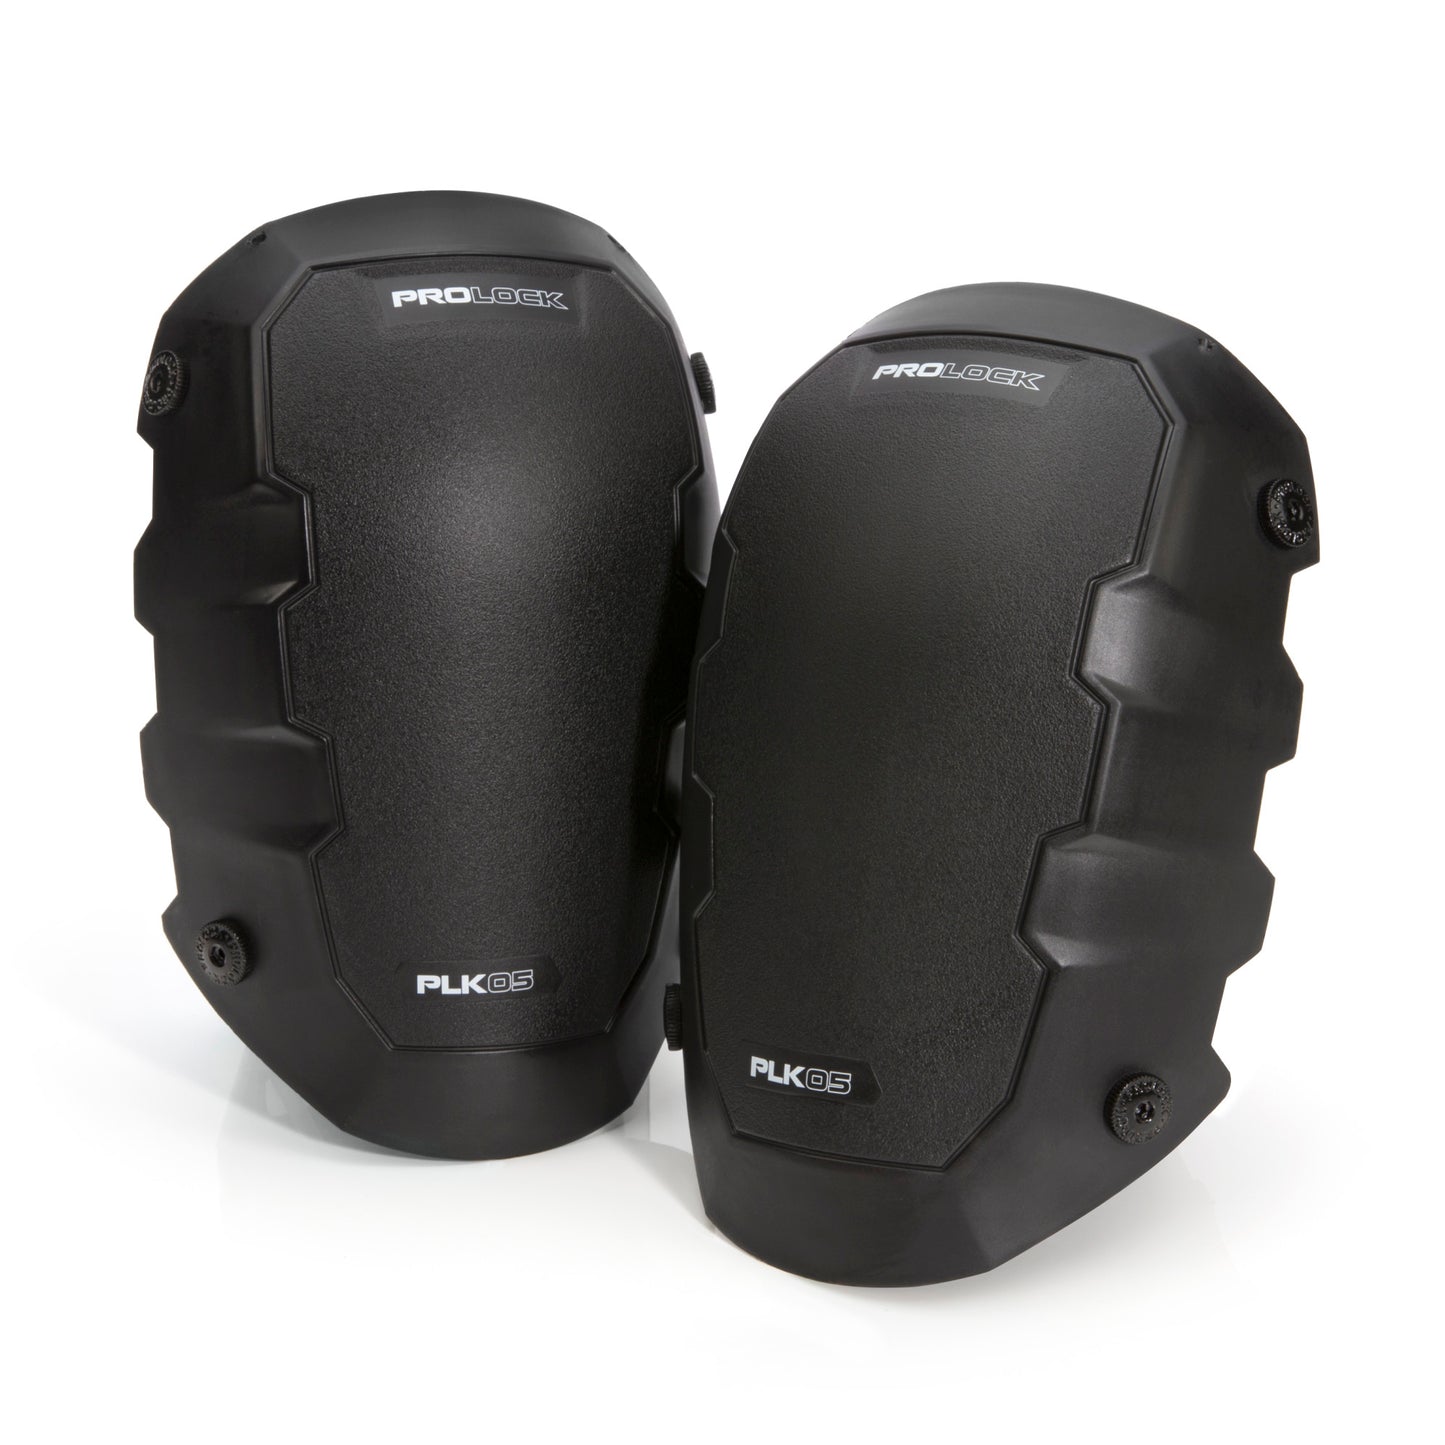 Hard Cap Attachment for PROLOCK Knee Pads (1 pair, caps only)